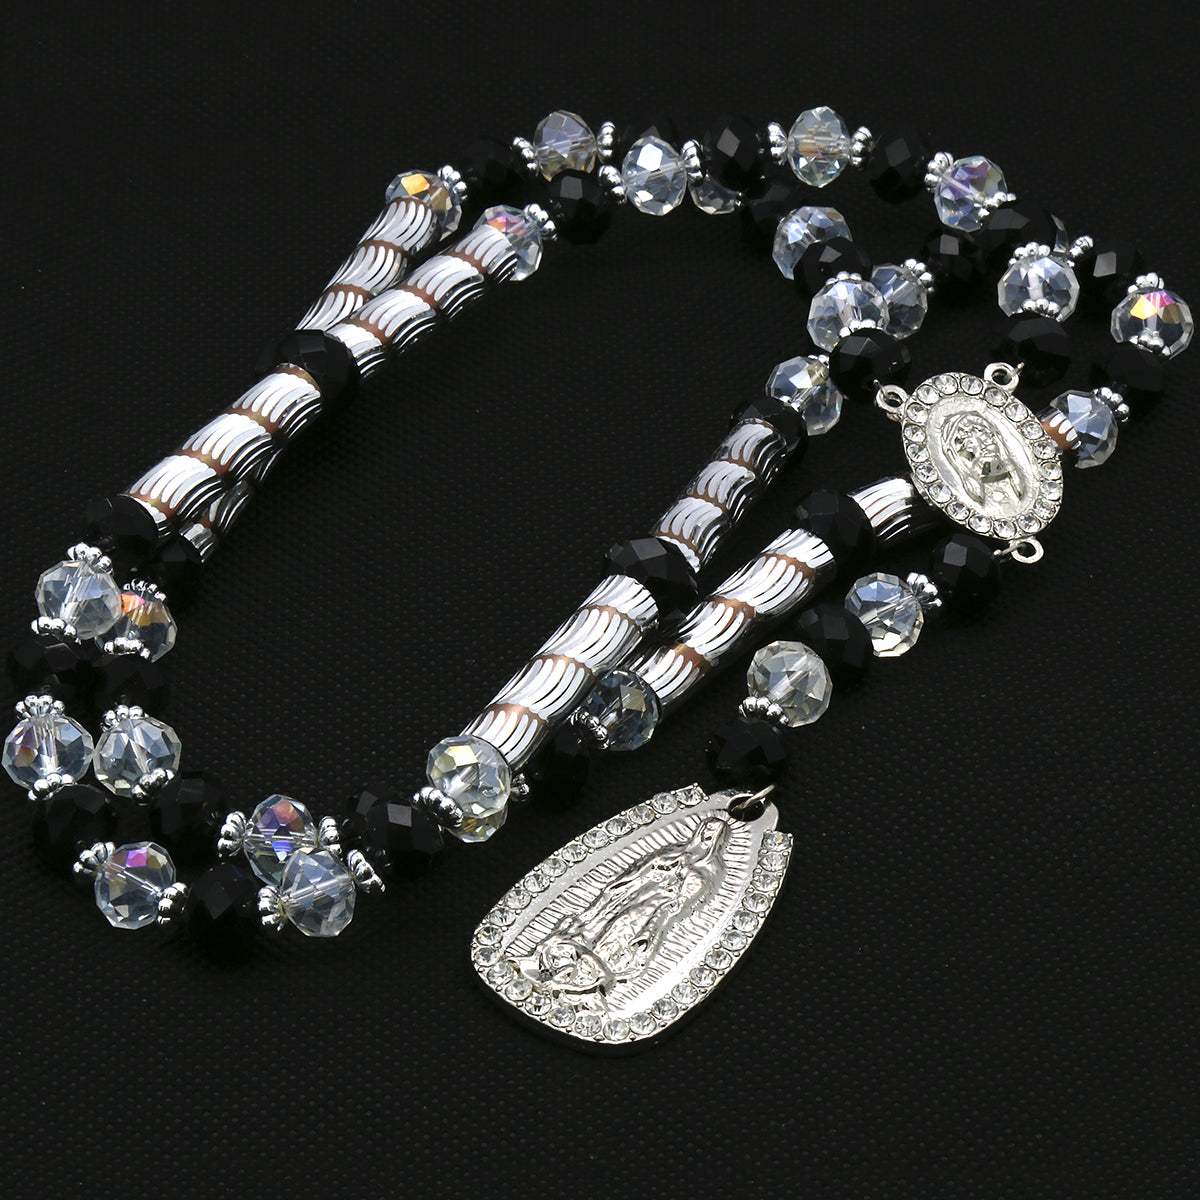 8MM Black/Clear Crystal Rosary Jesus Medal & Guadalupe Pendants